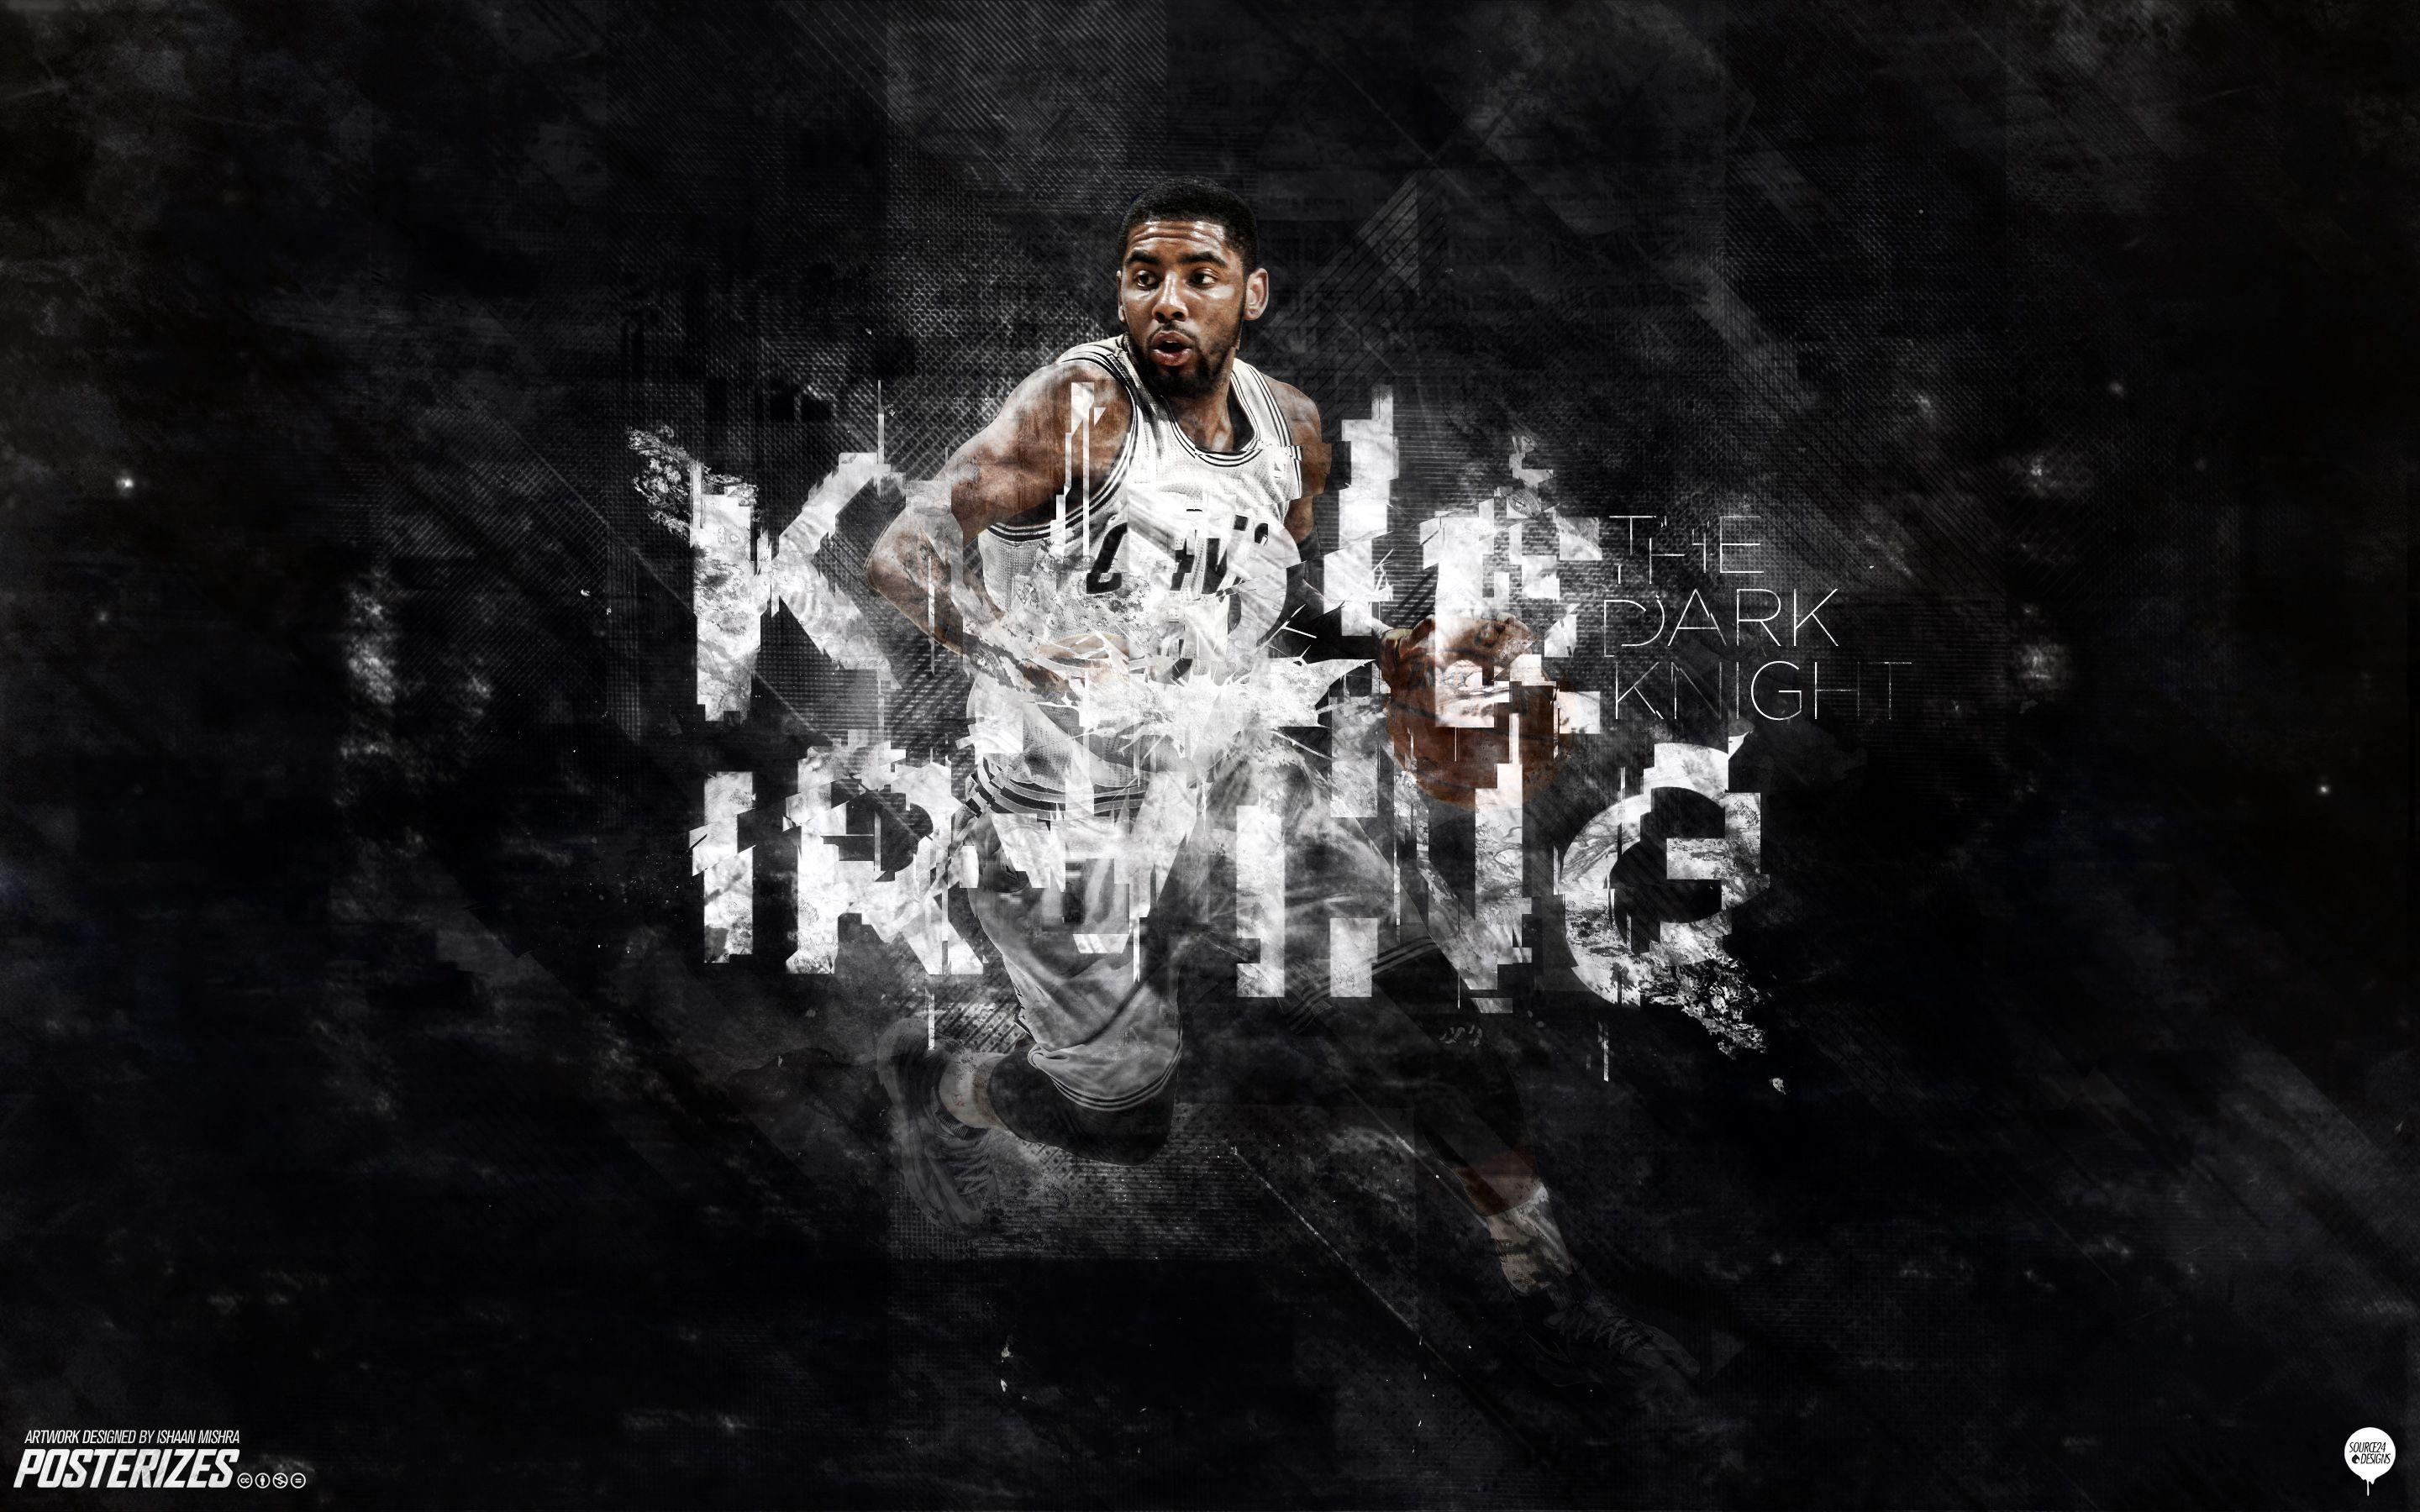 Kyrie Irving Hd Wallpapers Wallpaper Cave